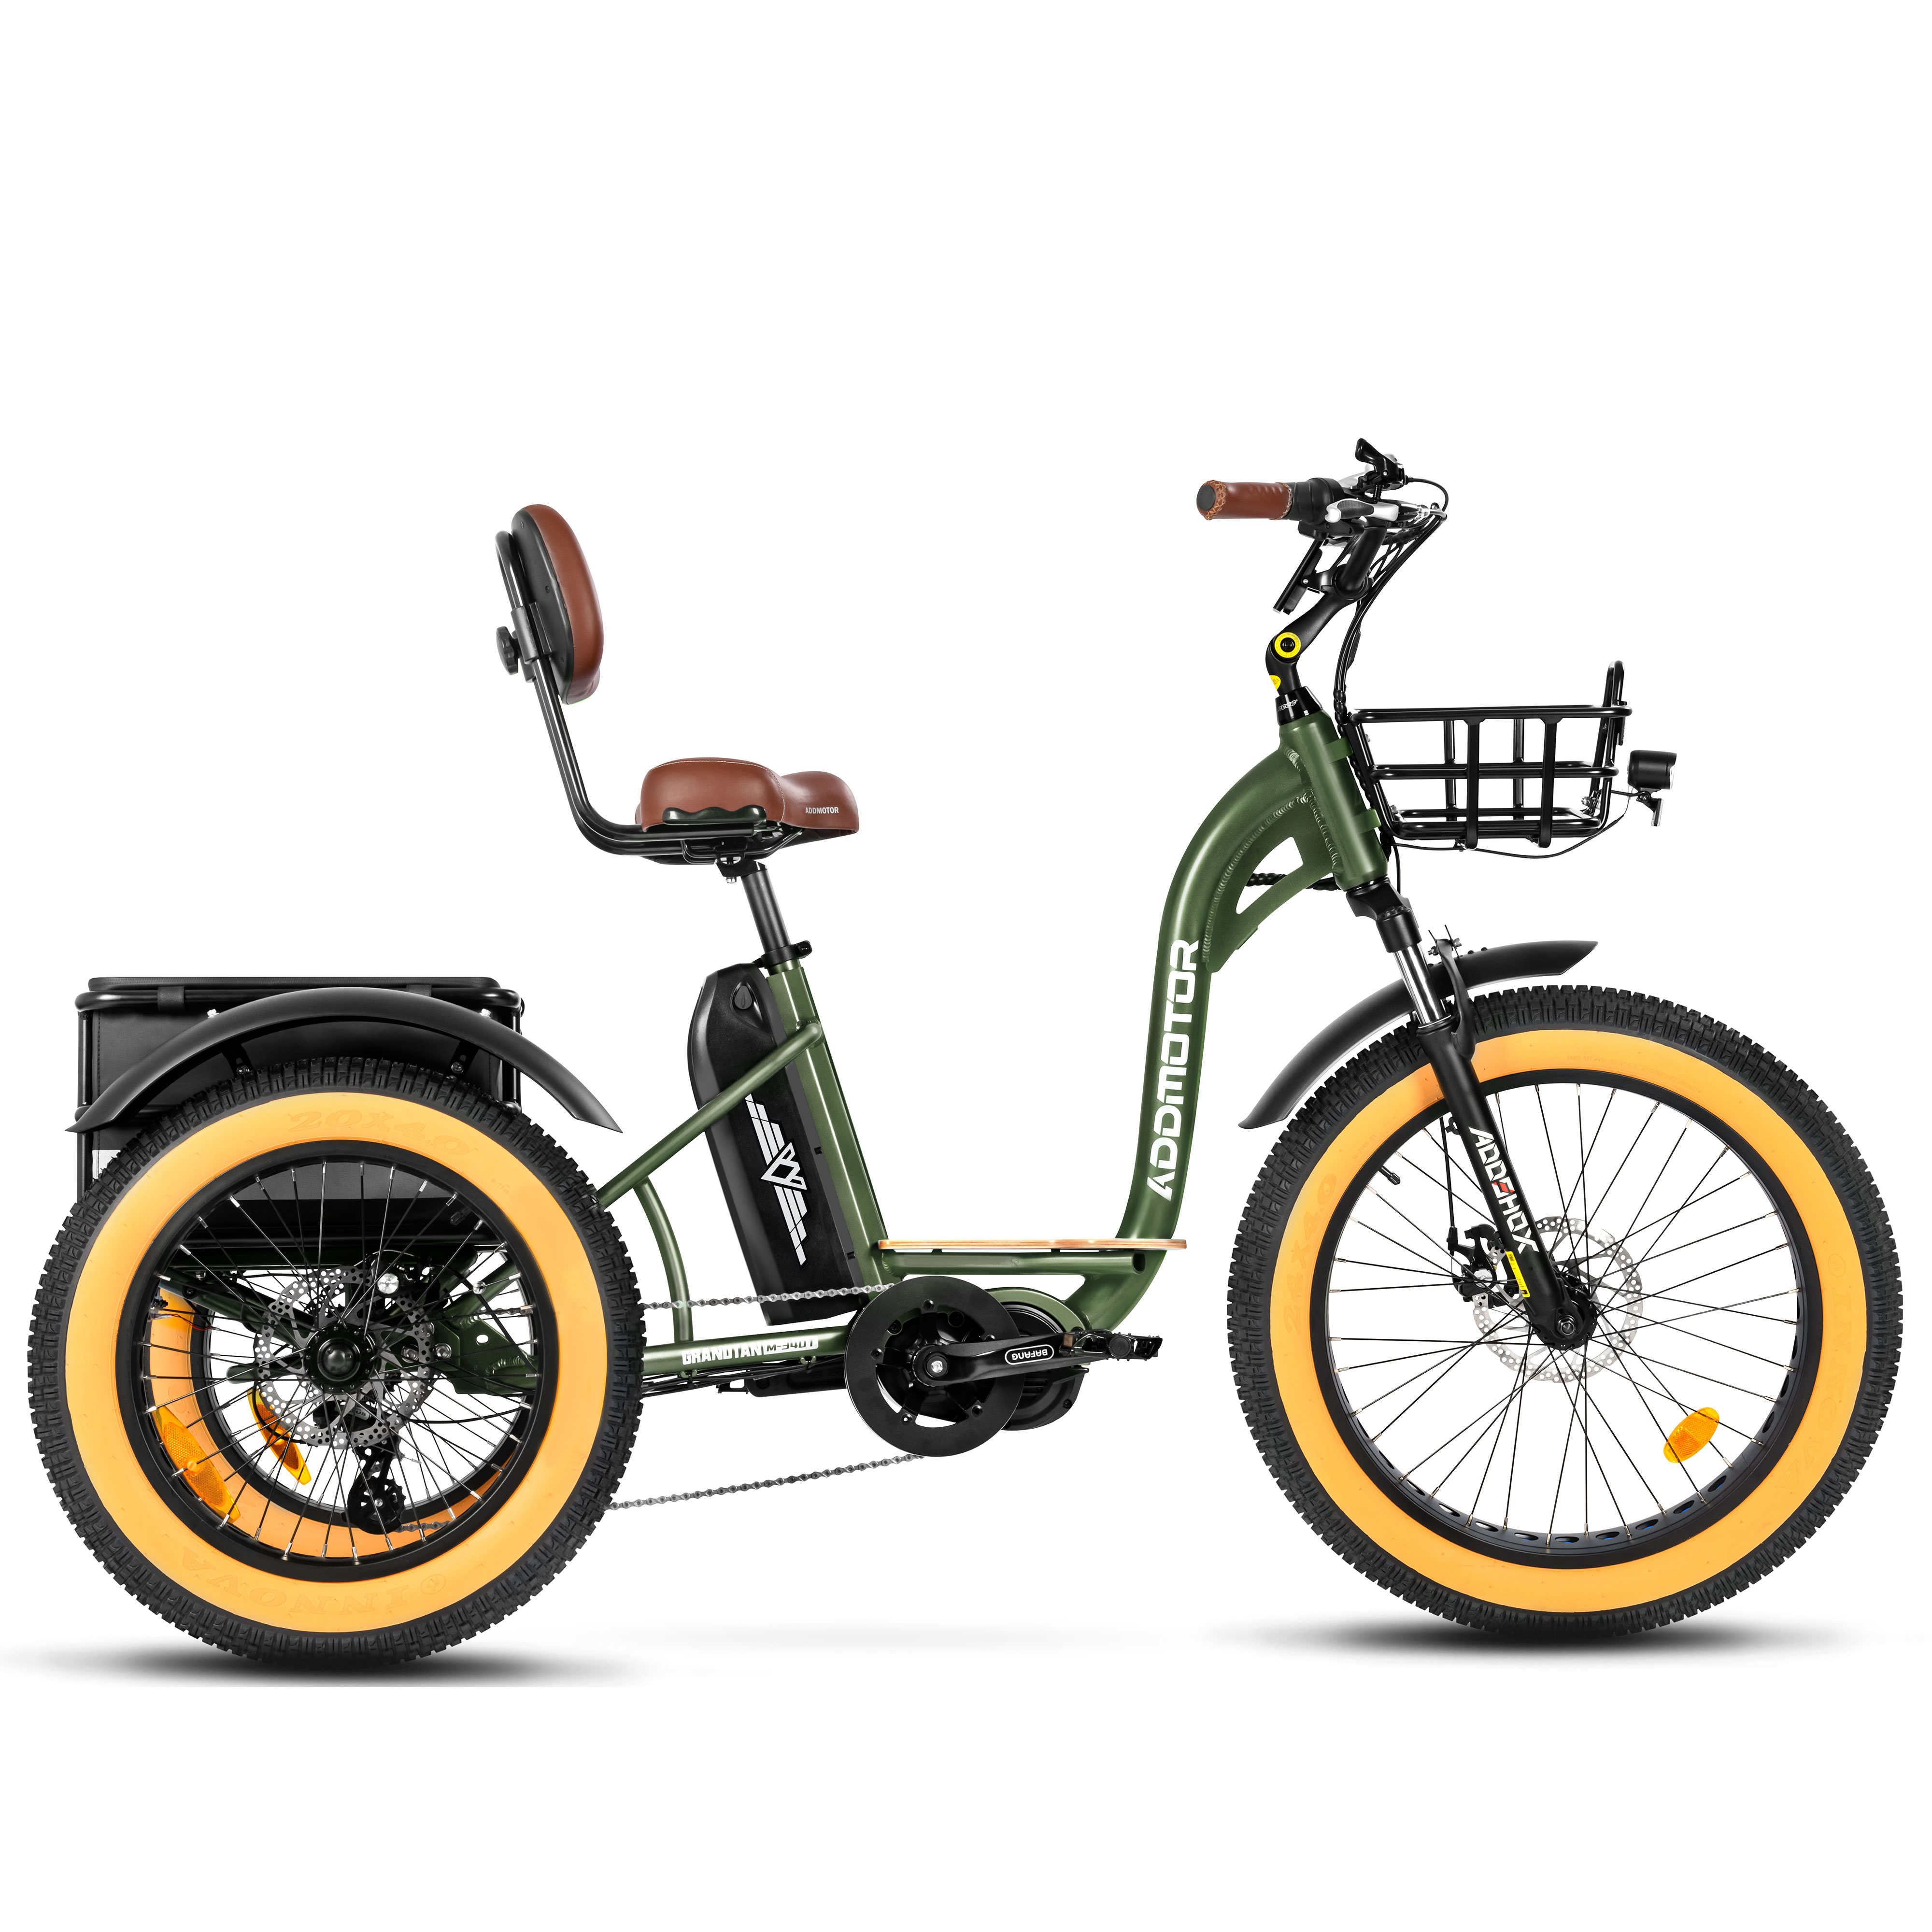 Addmotor Grandtan M-340T Electric Fat tire Trike with differential, Electric Tricycle for Adults, Bafang 1000W Mid-Drive Motor, Army Green